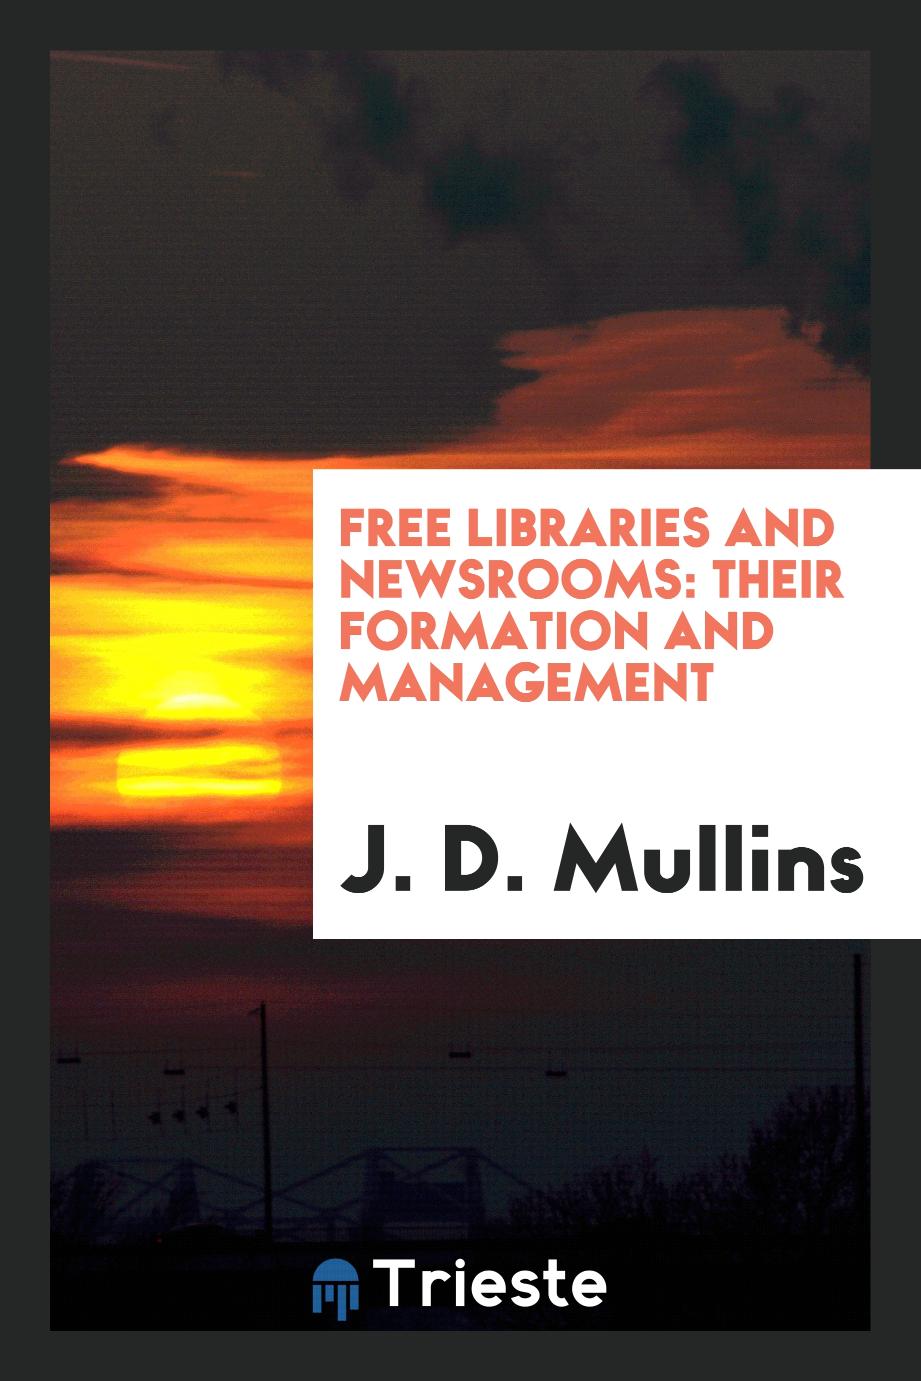 Free Libraries and Newsrooms: Their Formation and Management